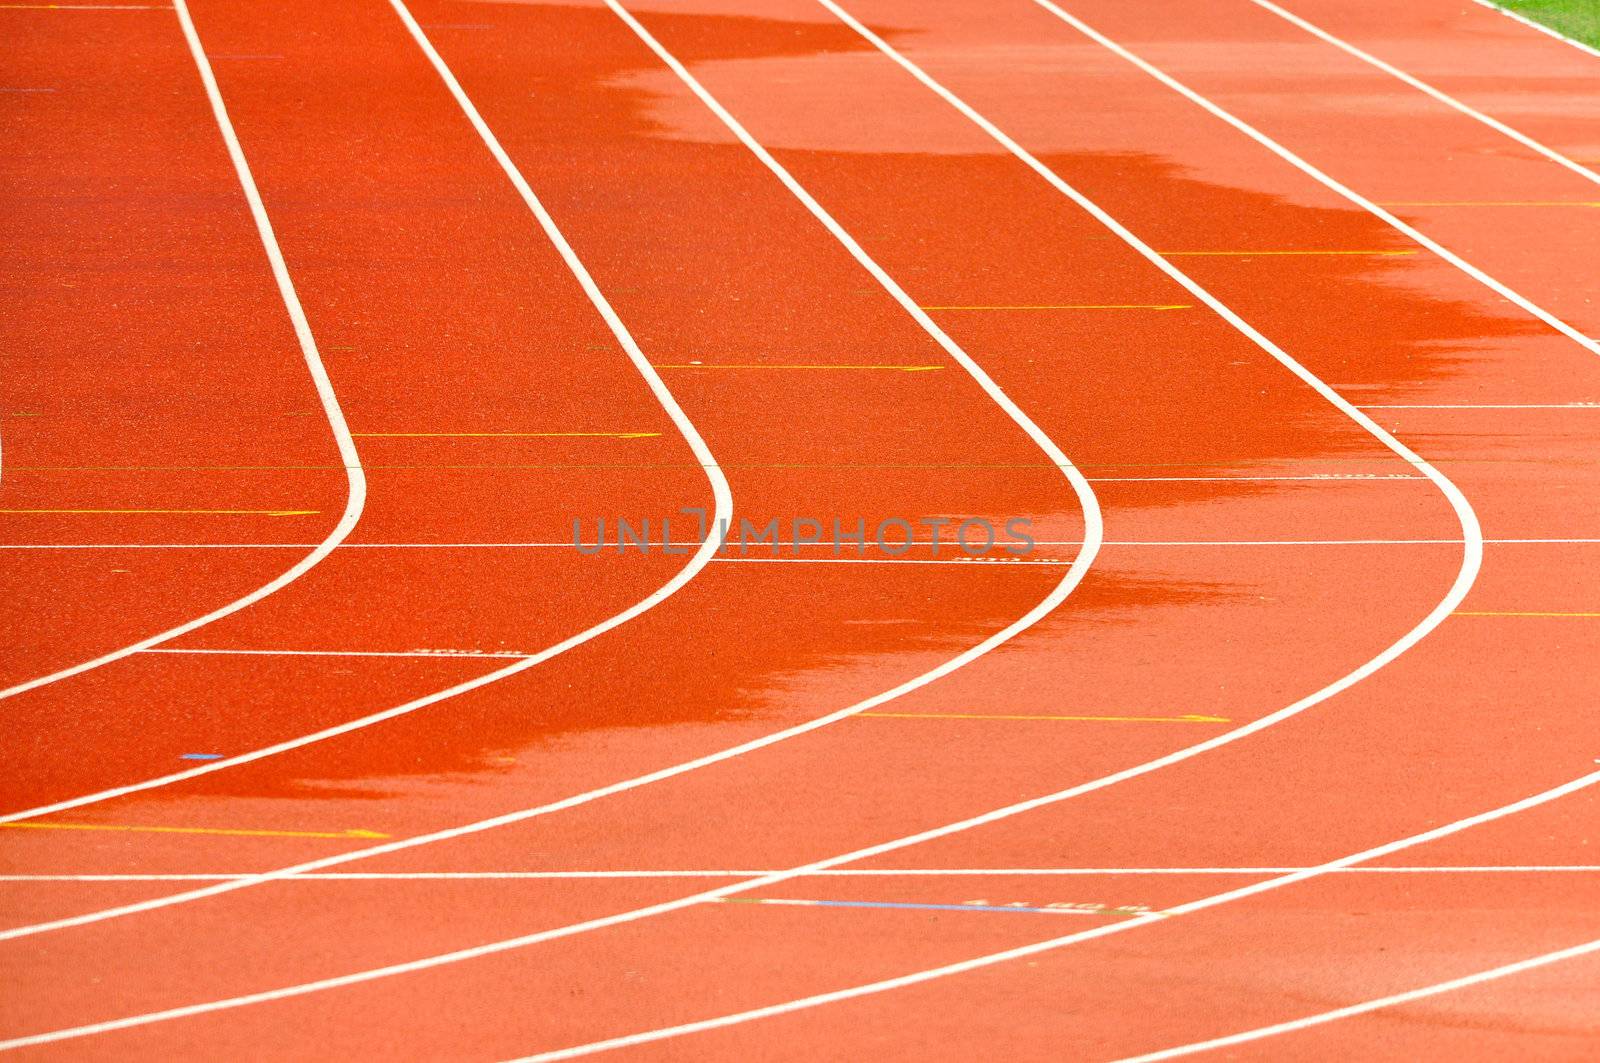 Details of a wet athletics running track